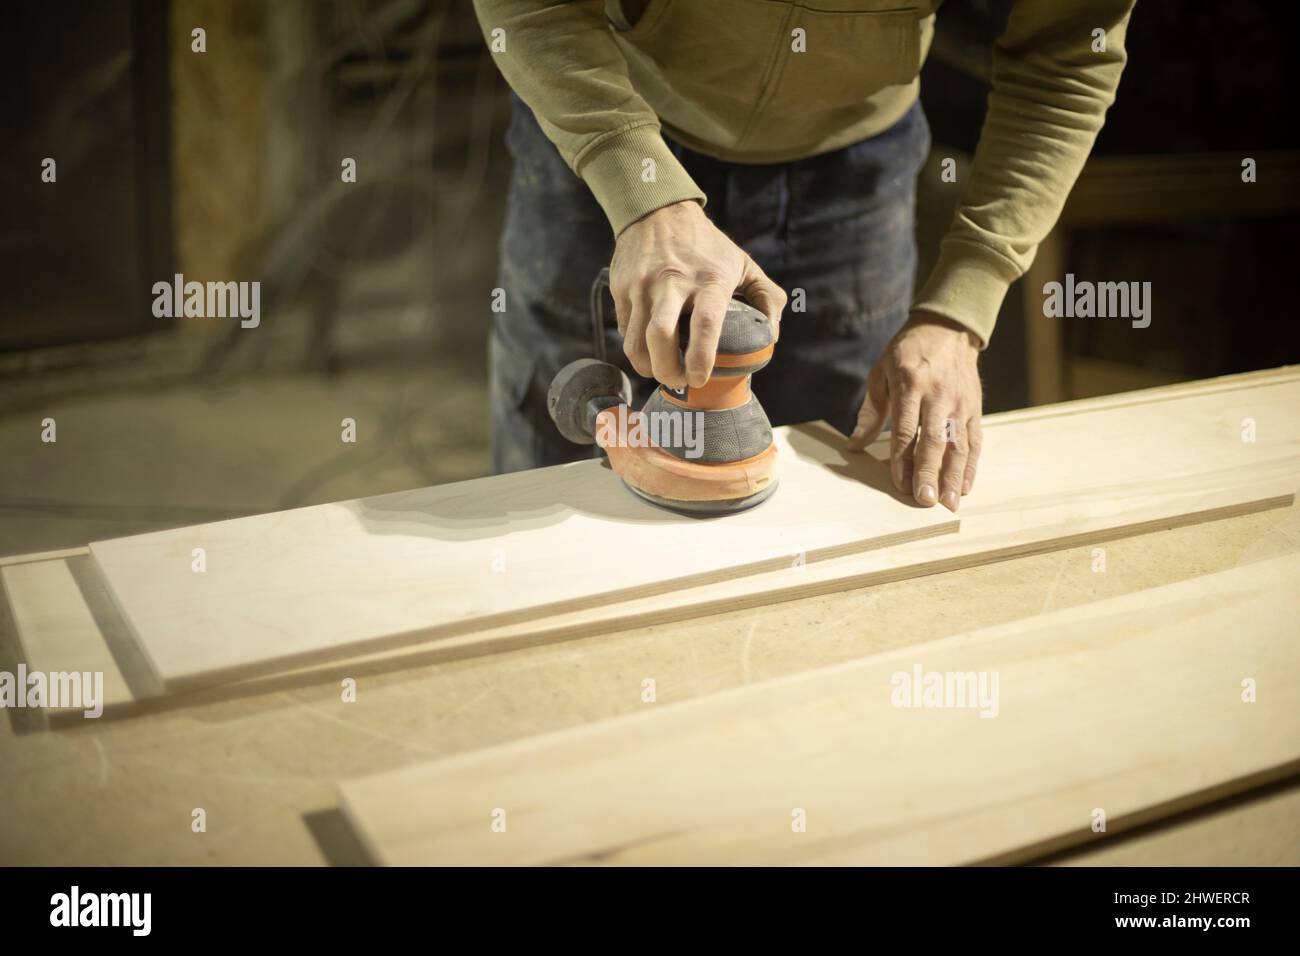 Carpenter grinds wood. Grinding tool. Guy in workshop handles board. Person holds grinding technique in his hands. Stock Photo